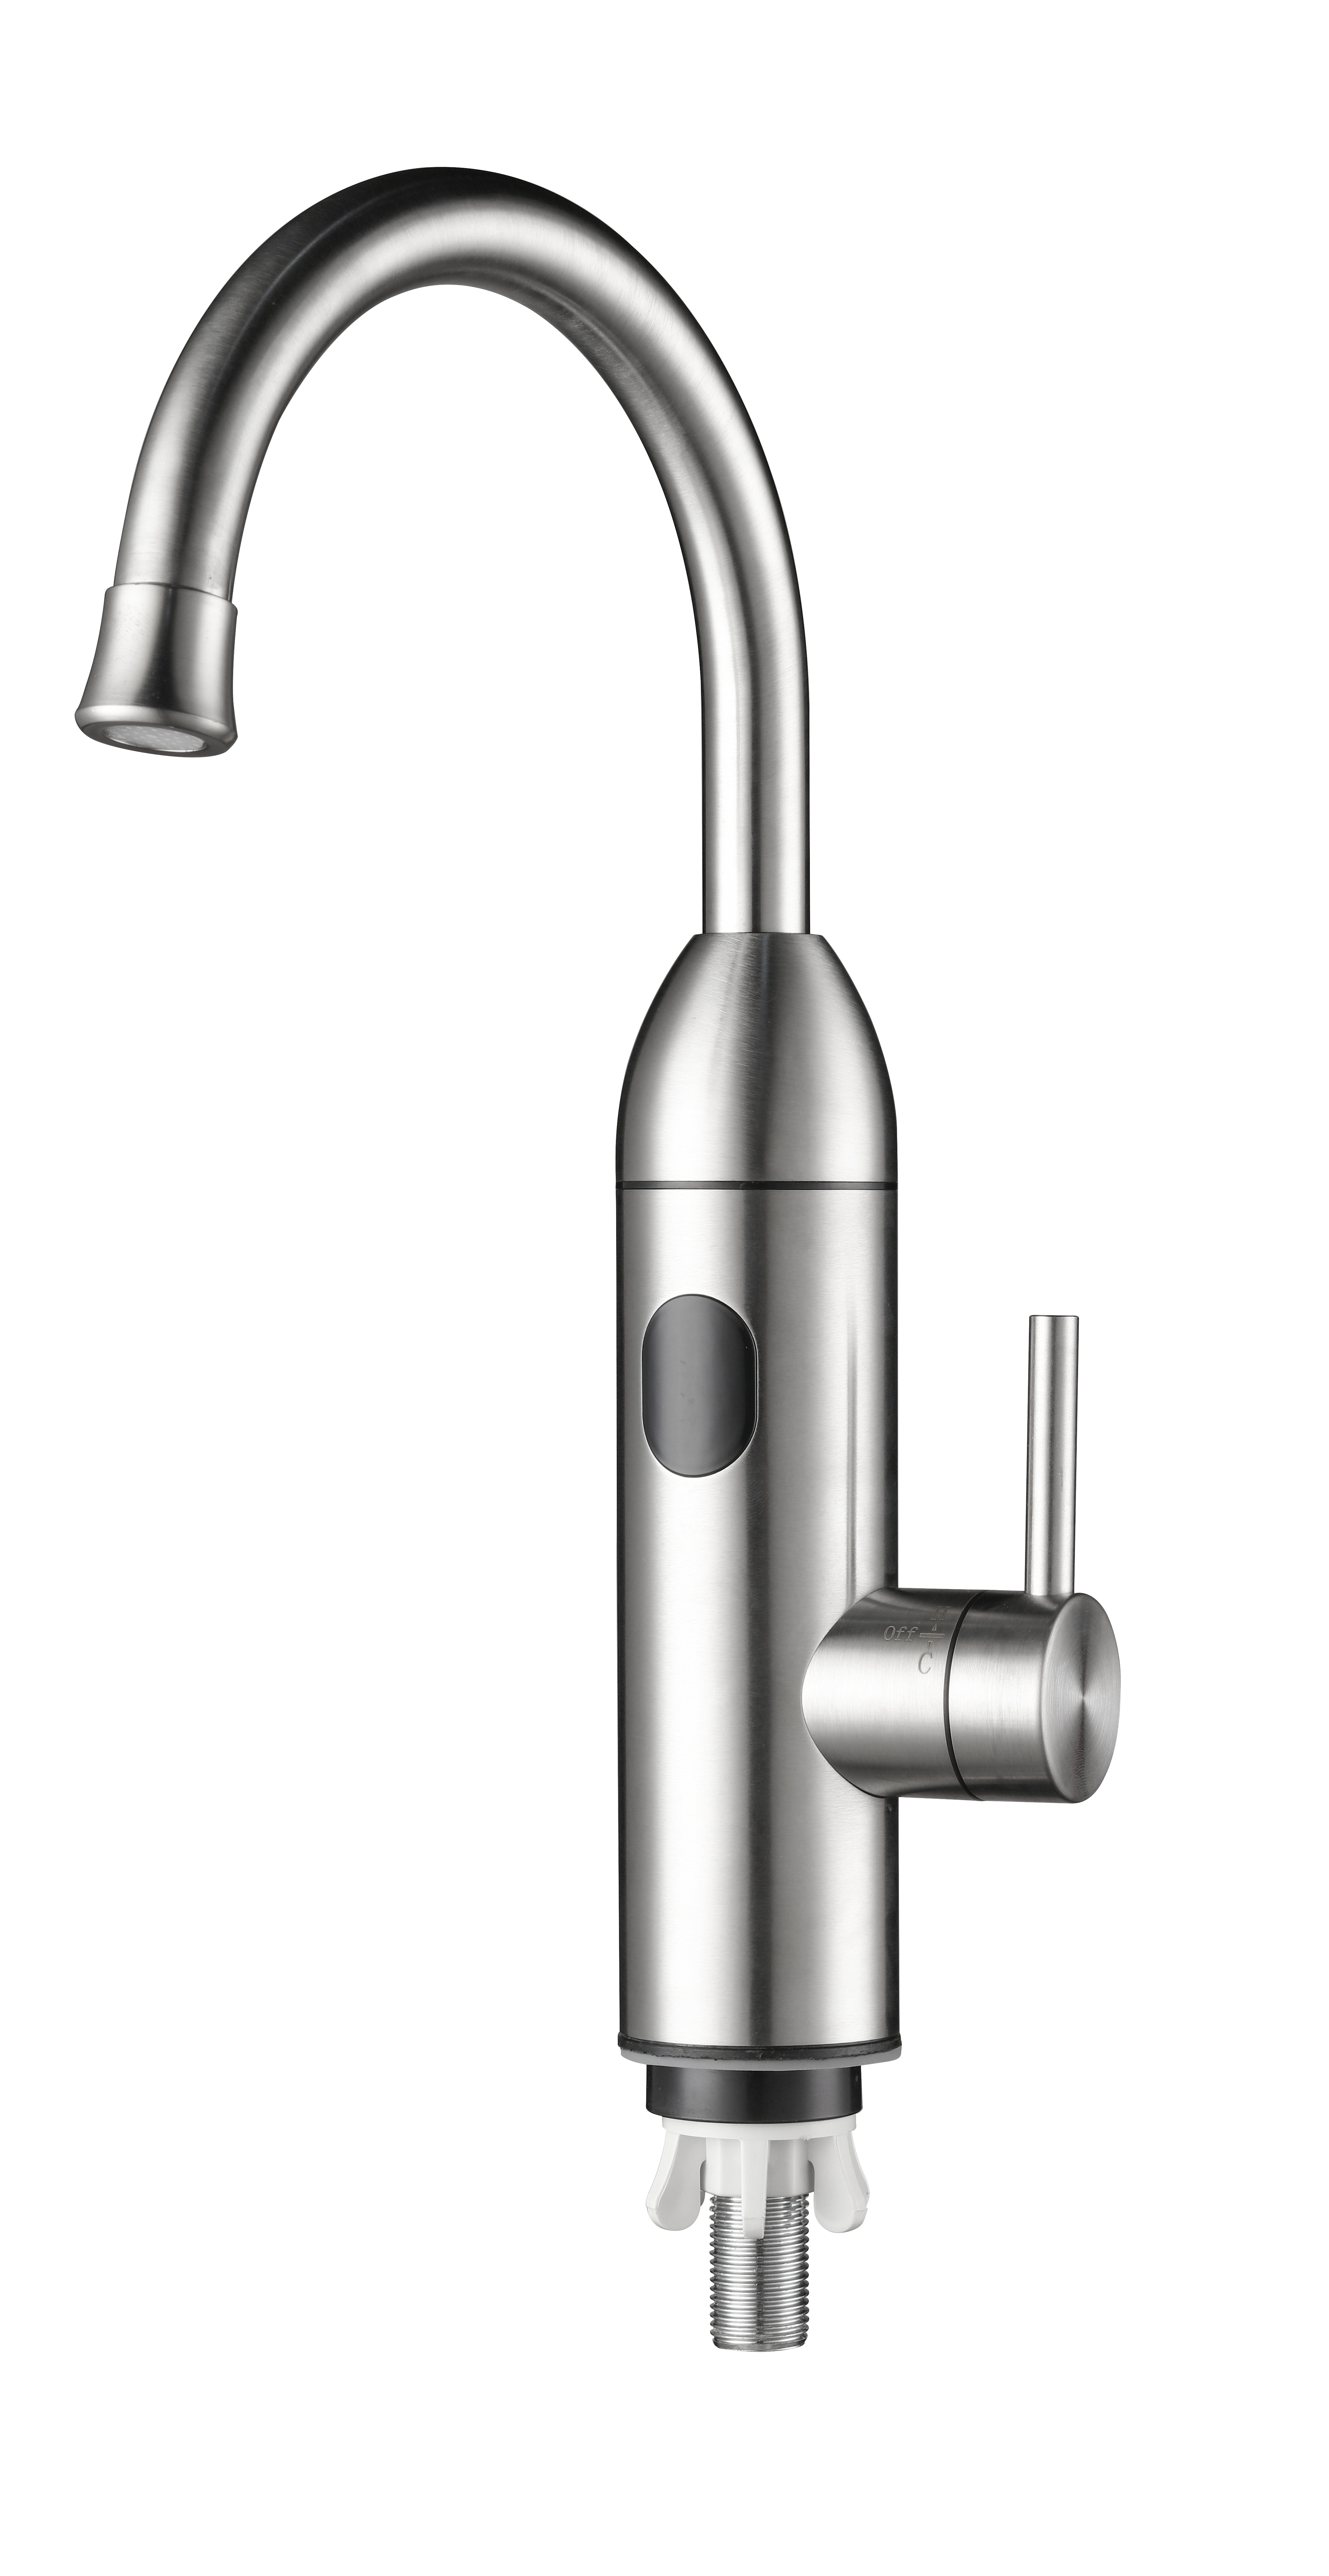 Repair methods for common faults of electric water faucet